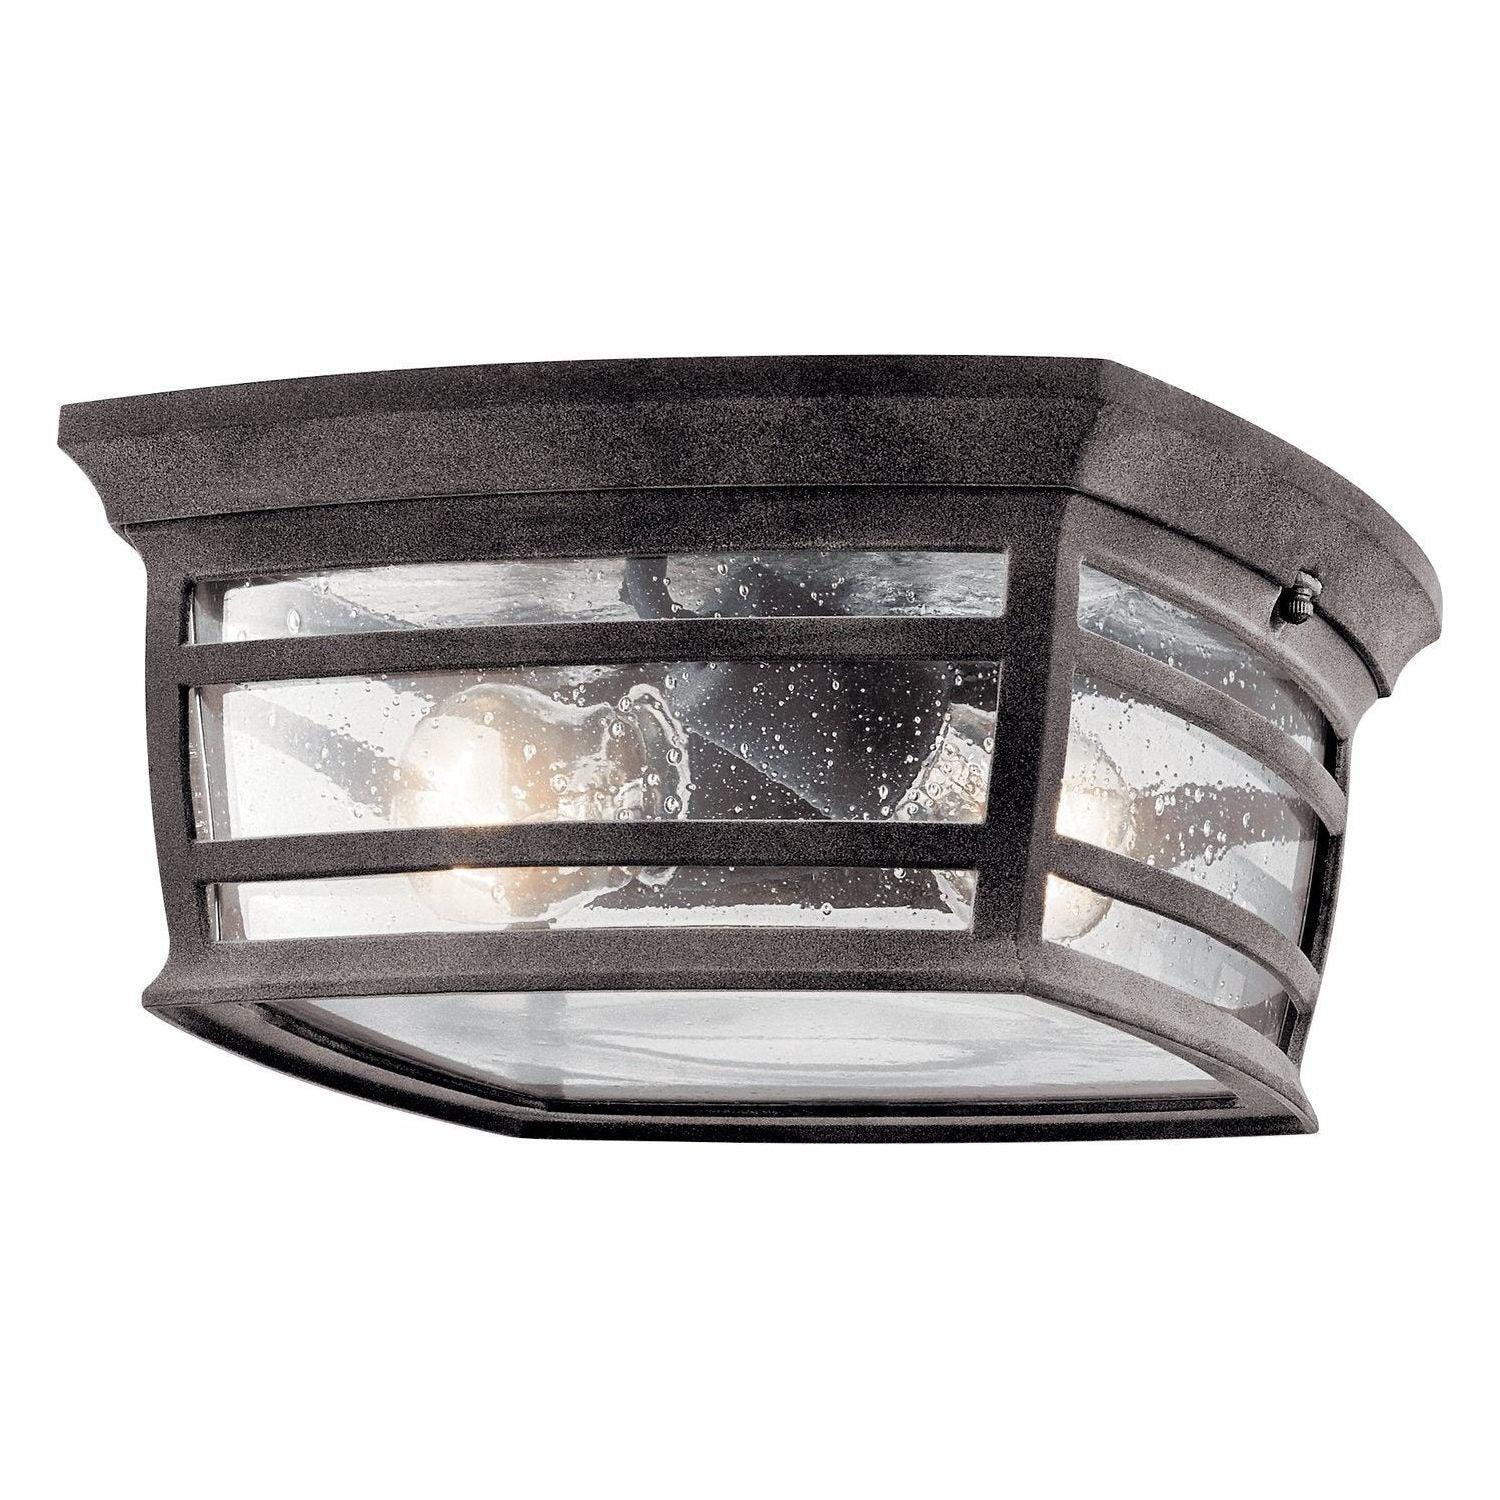 Kichler - Wiscombe Park Outdoor Ceiling Light - Lights Canada